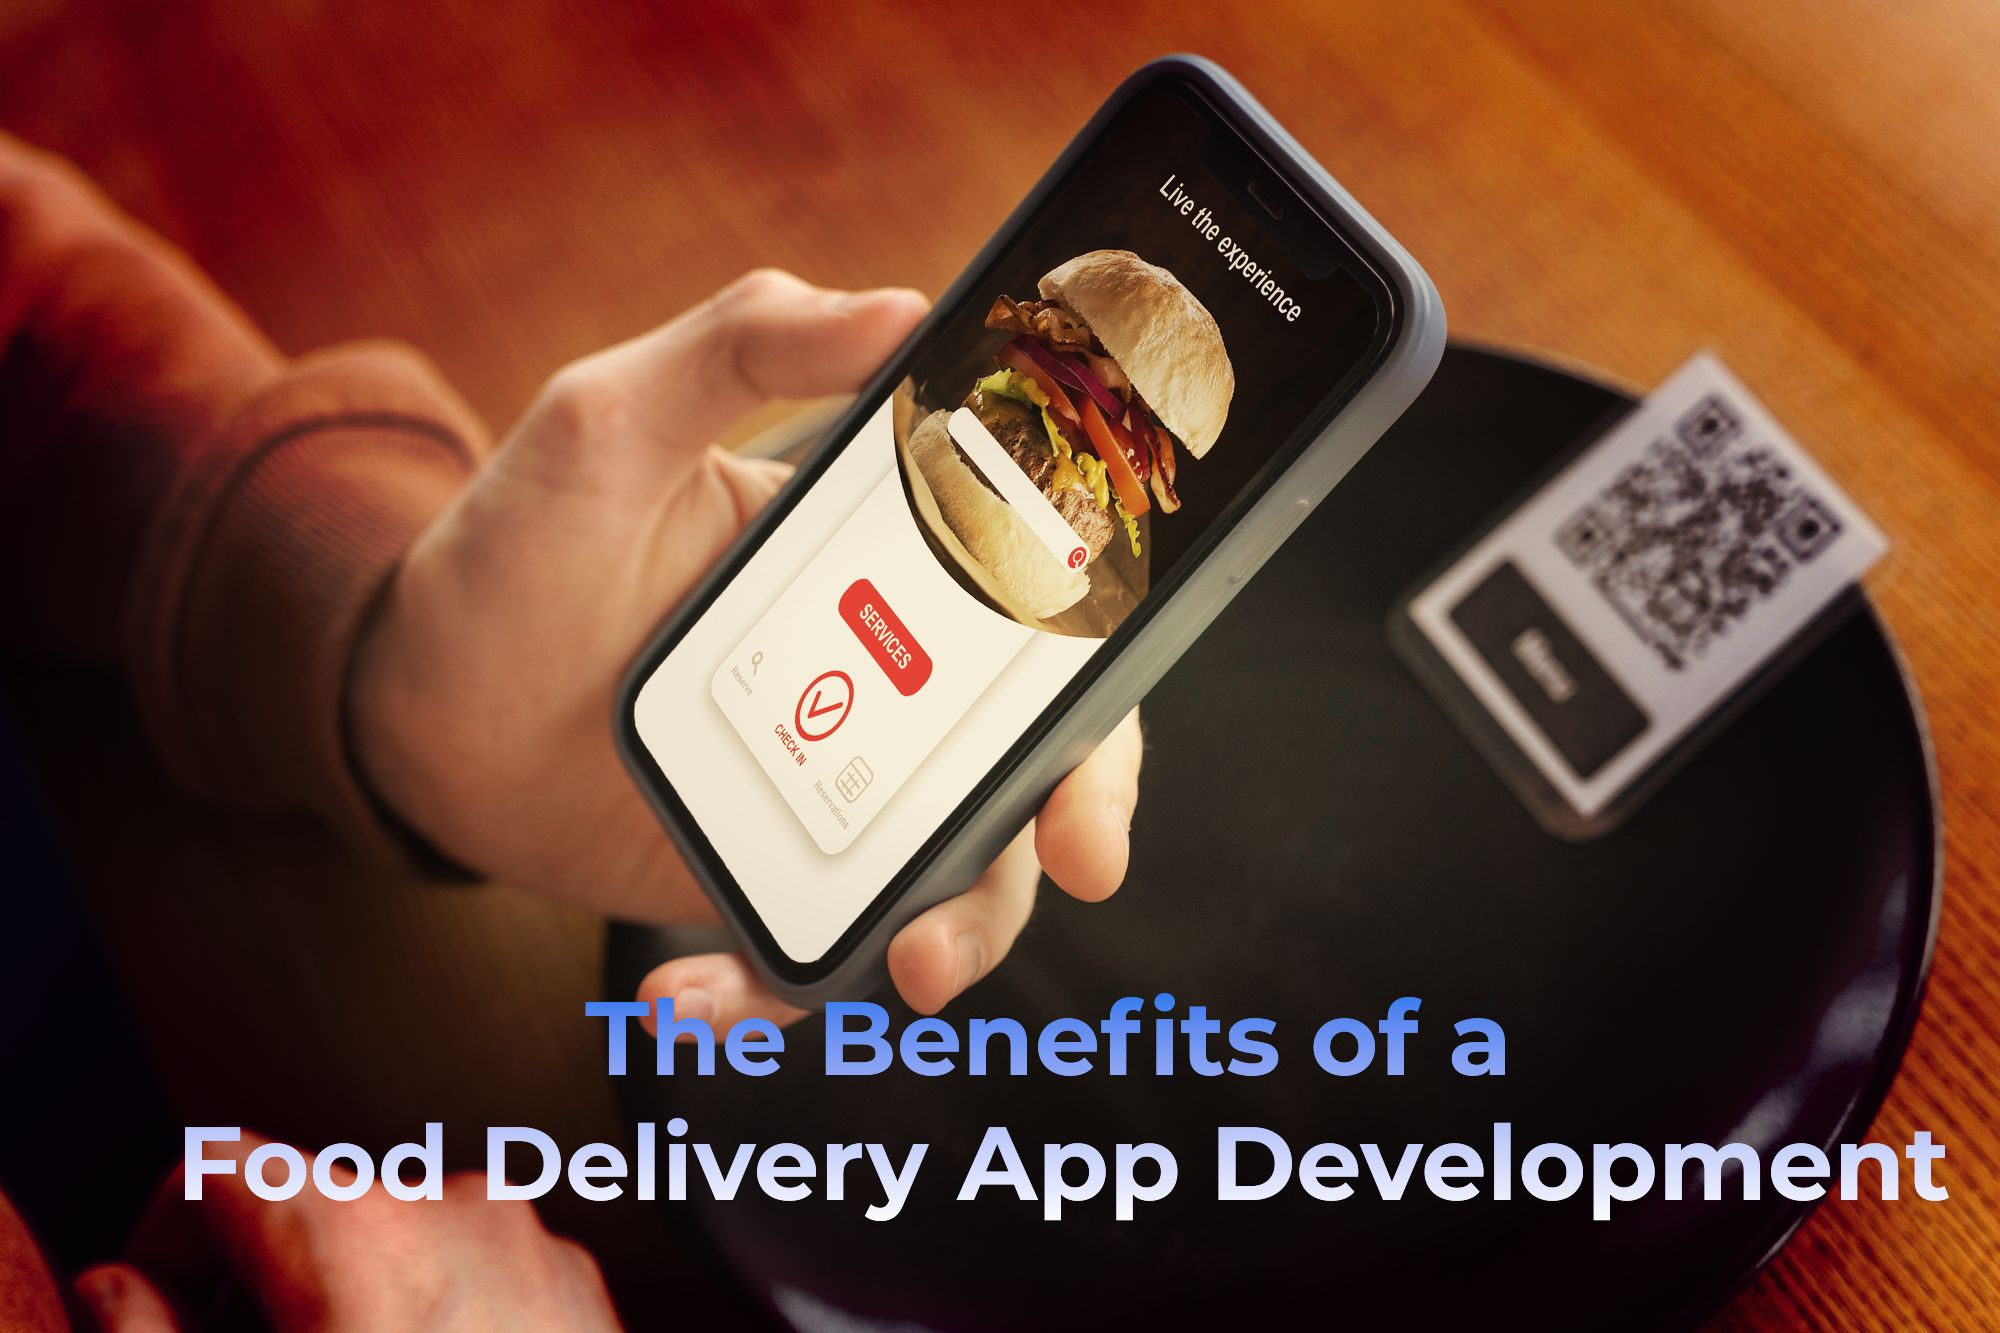 The Benefits of a Food Delivery App Development